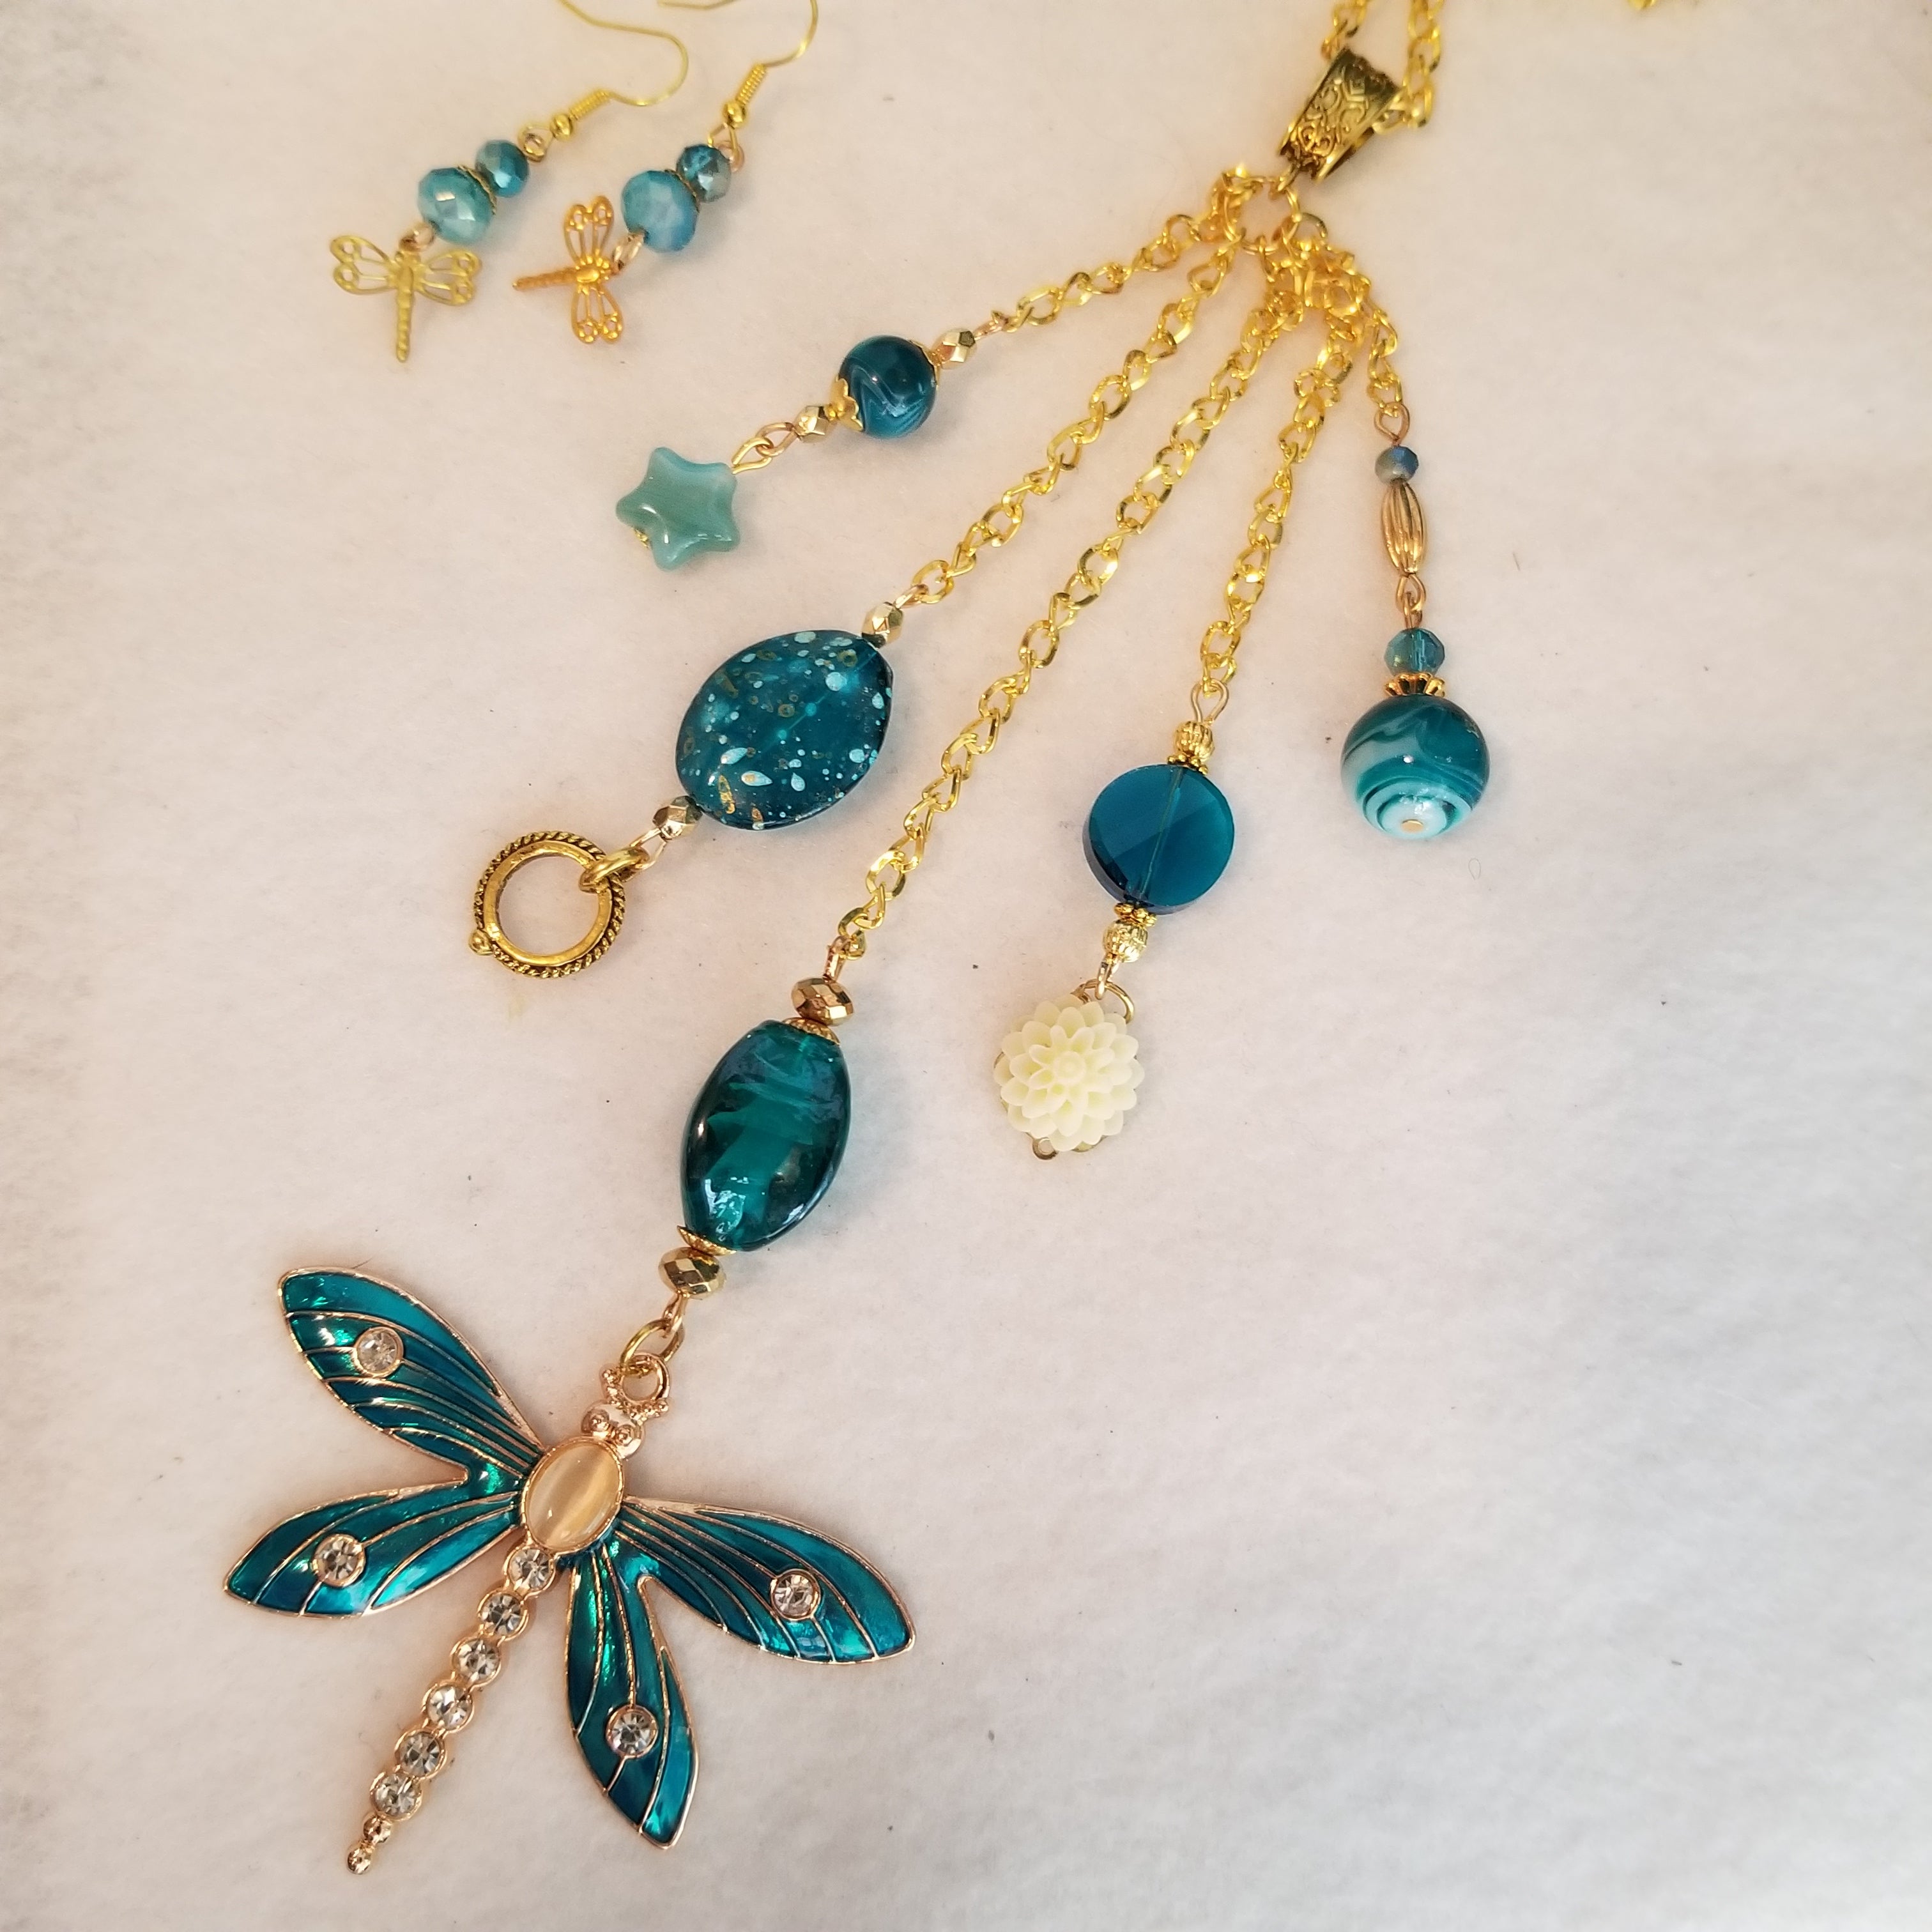 Teal Dragonfly Necklace with Earrings